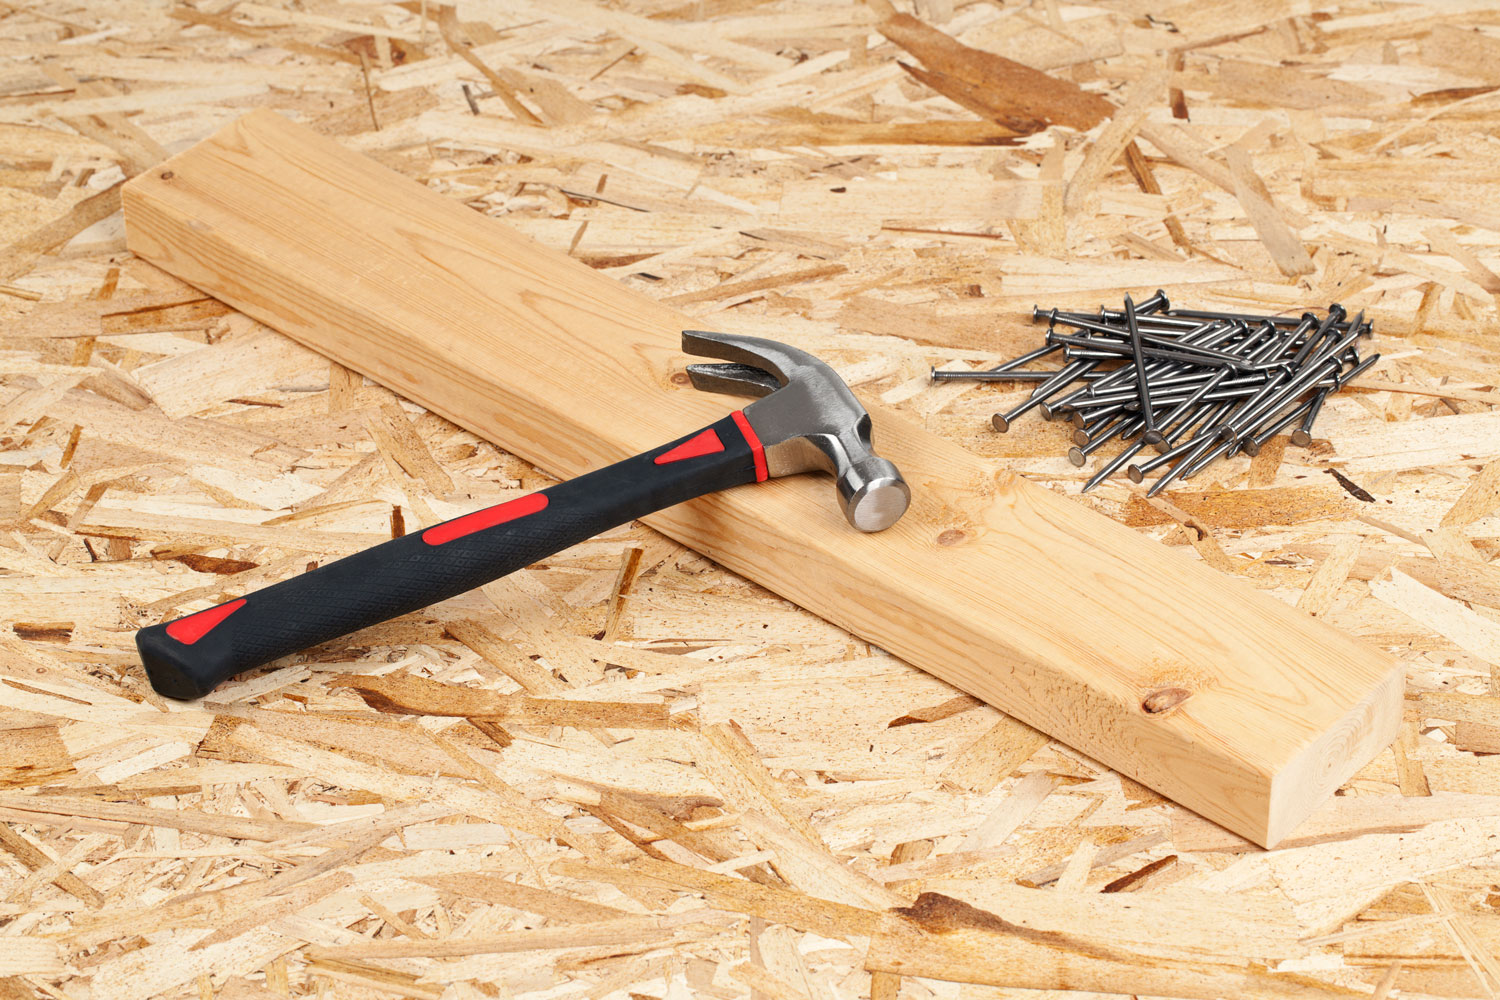 Hammer and nails with a wooden plank on the side at a construction site